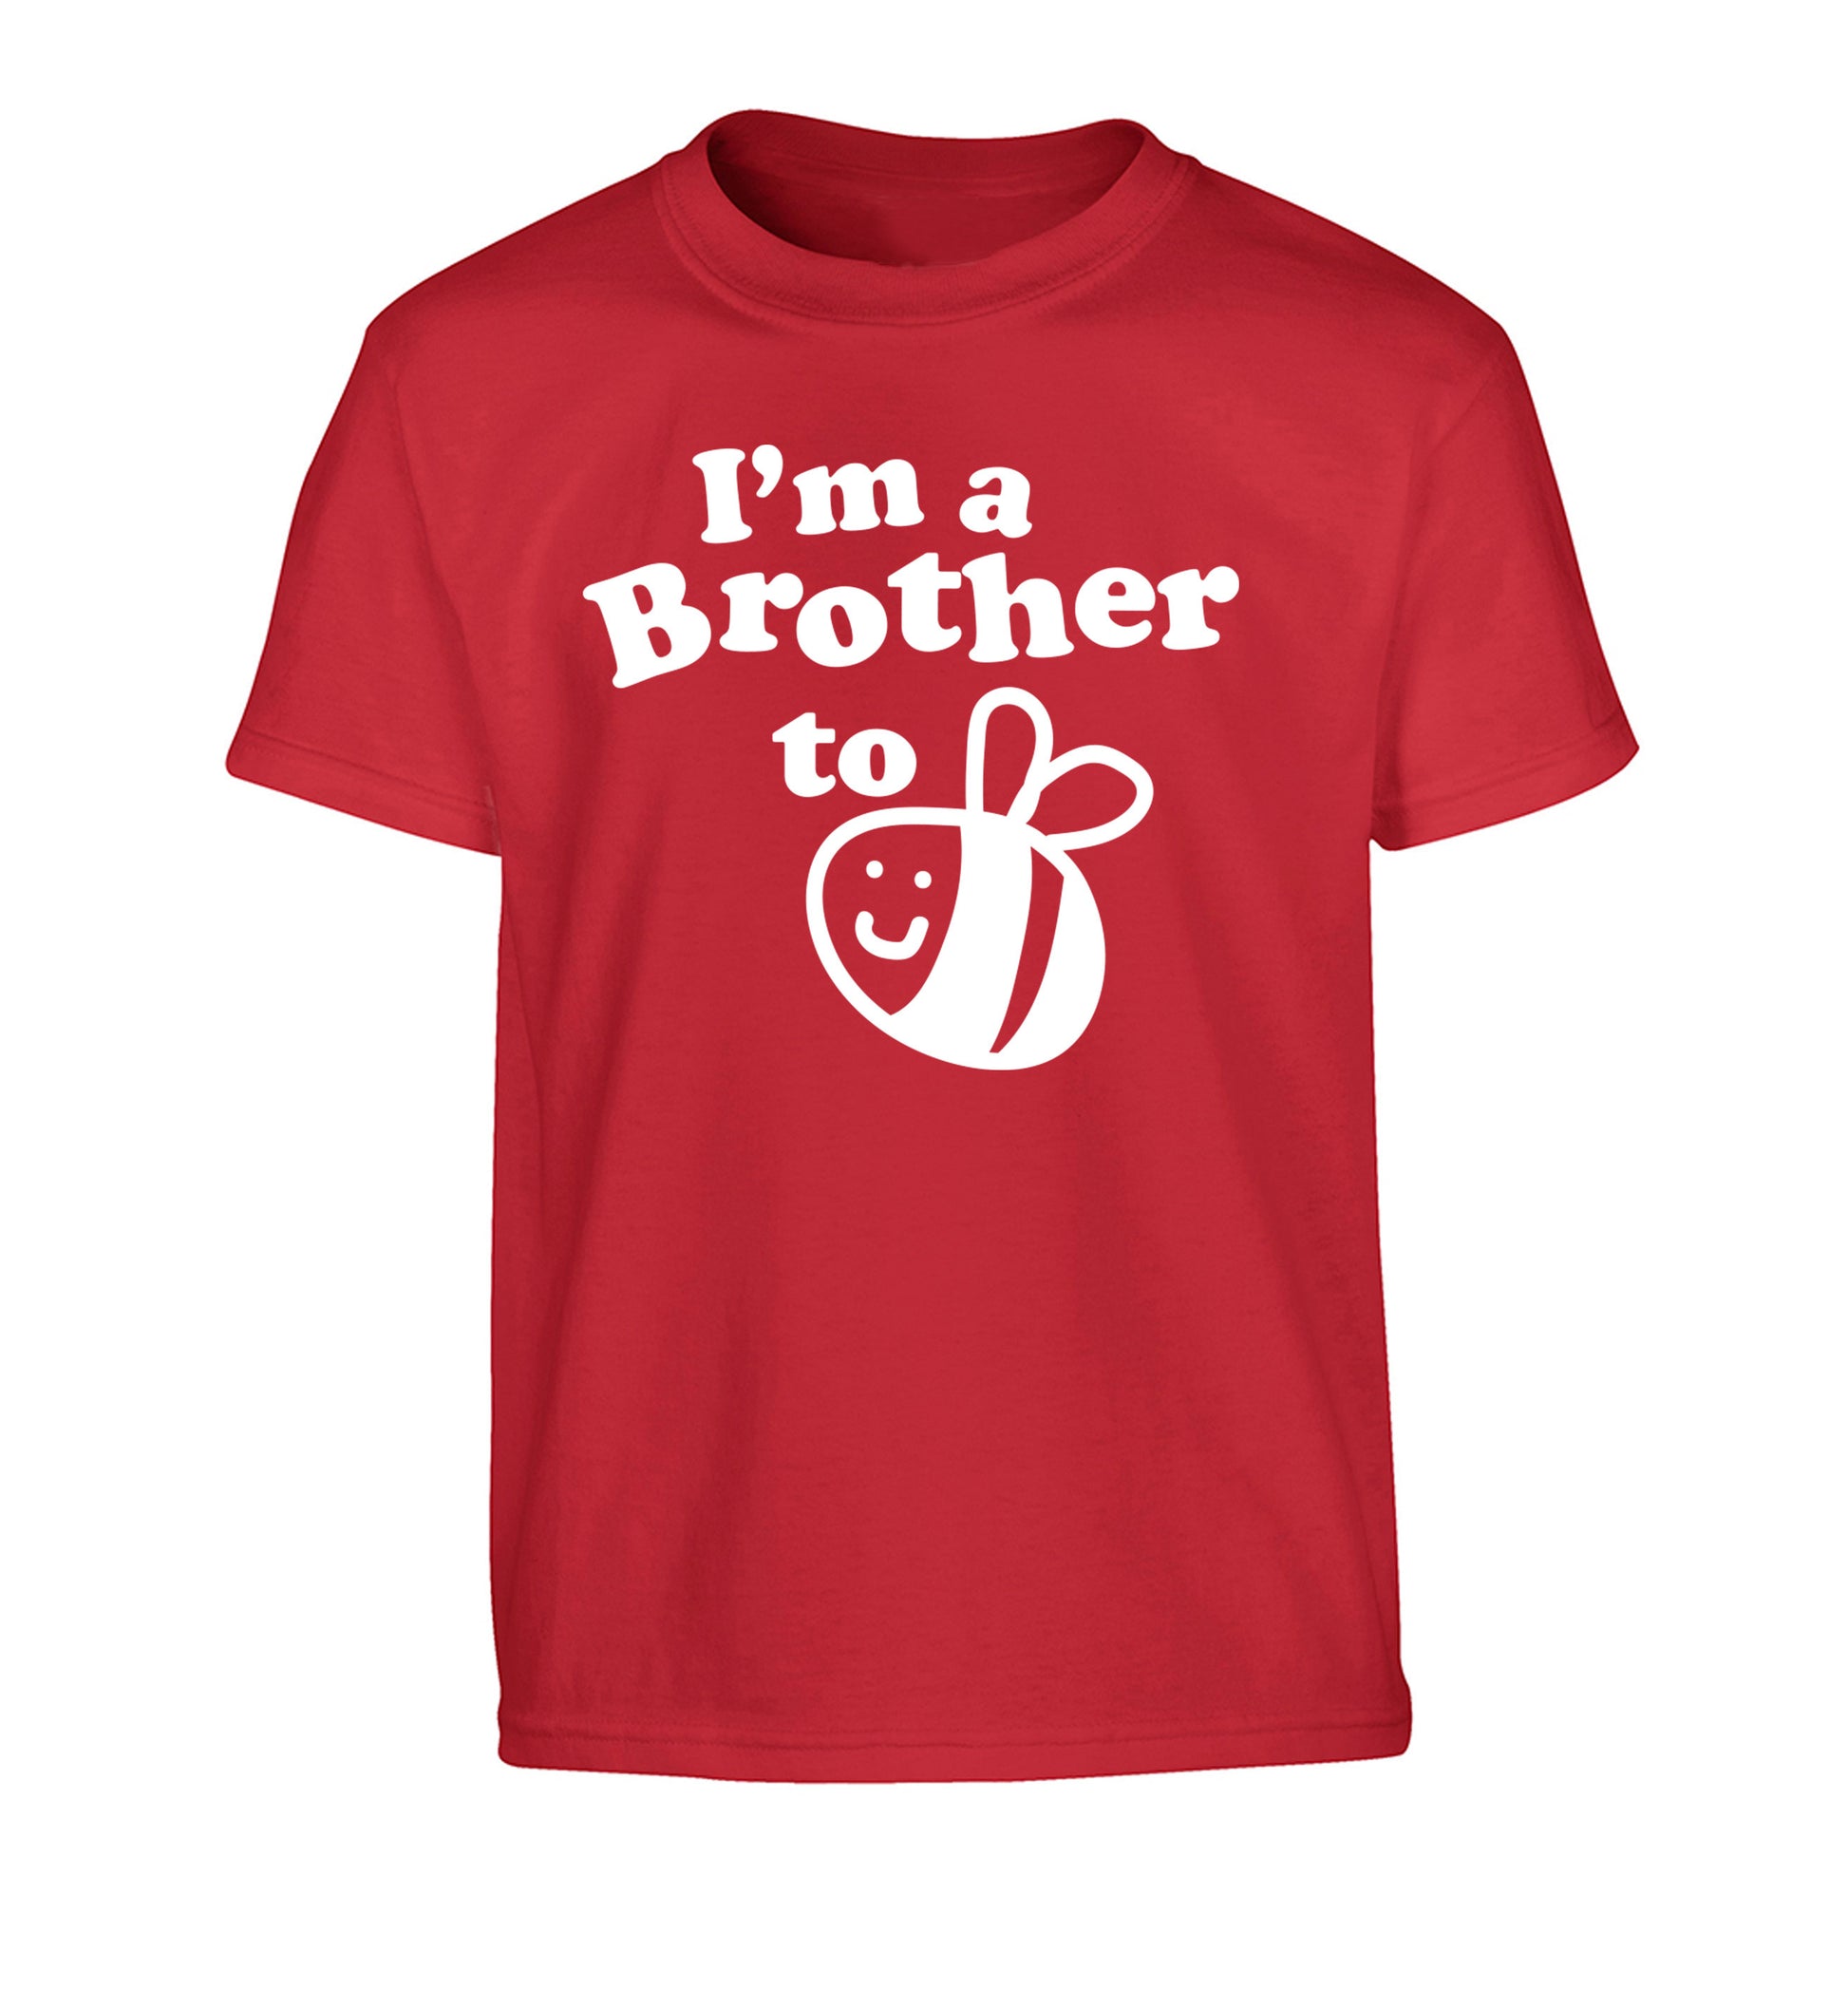 I'm a brother to be Children's red Tshirt 12-14 Years